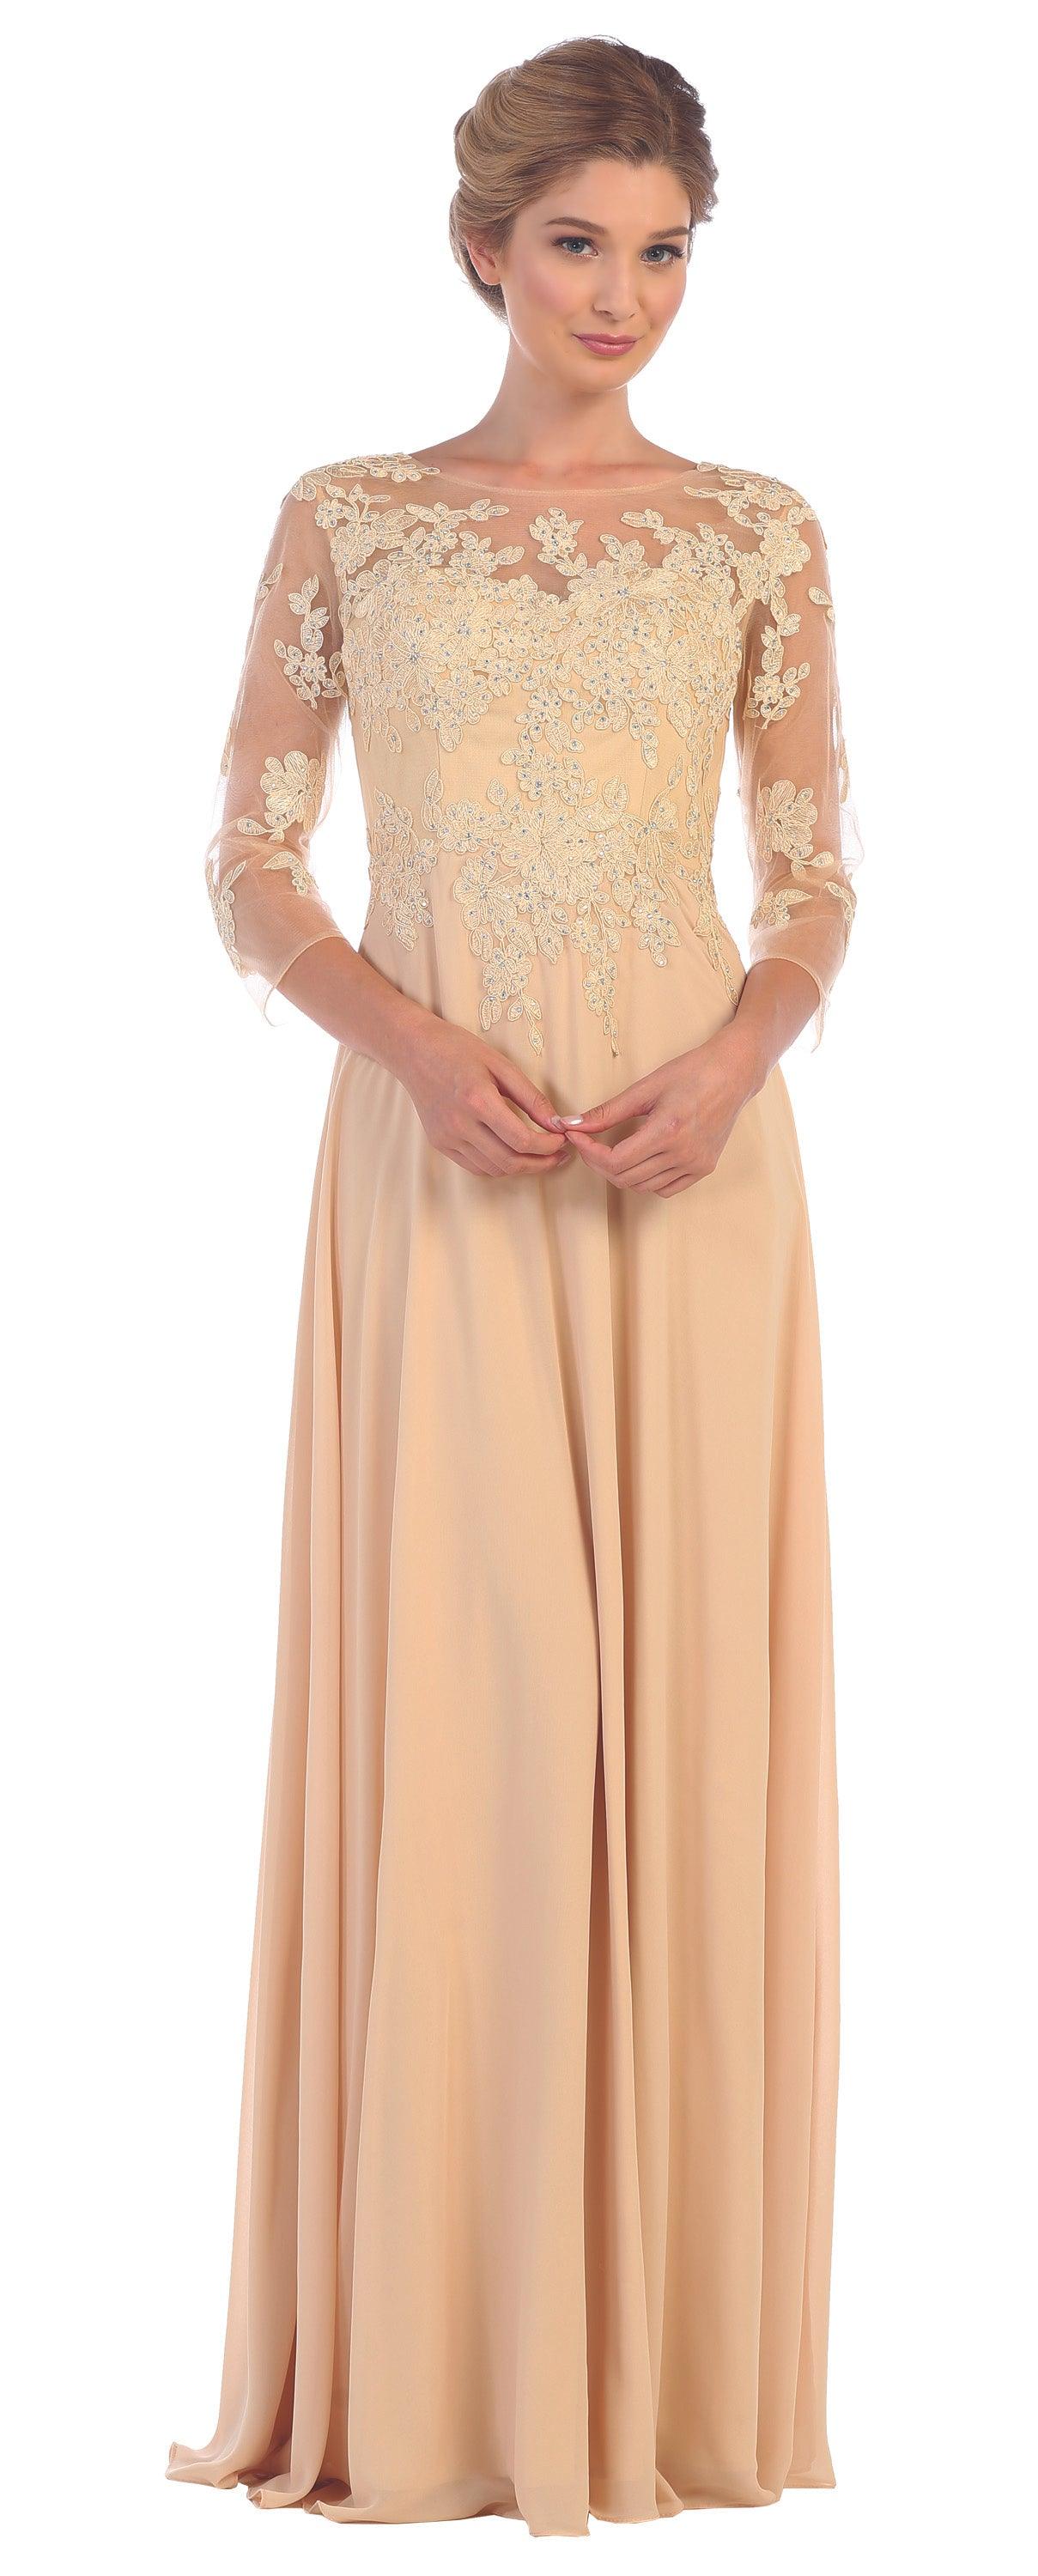 Long Mother of the Bride Formal Chiffon Dress | The Dress Outlet